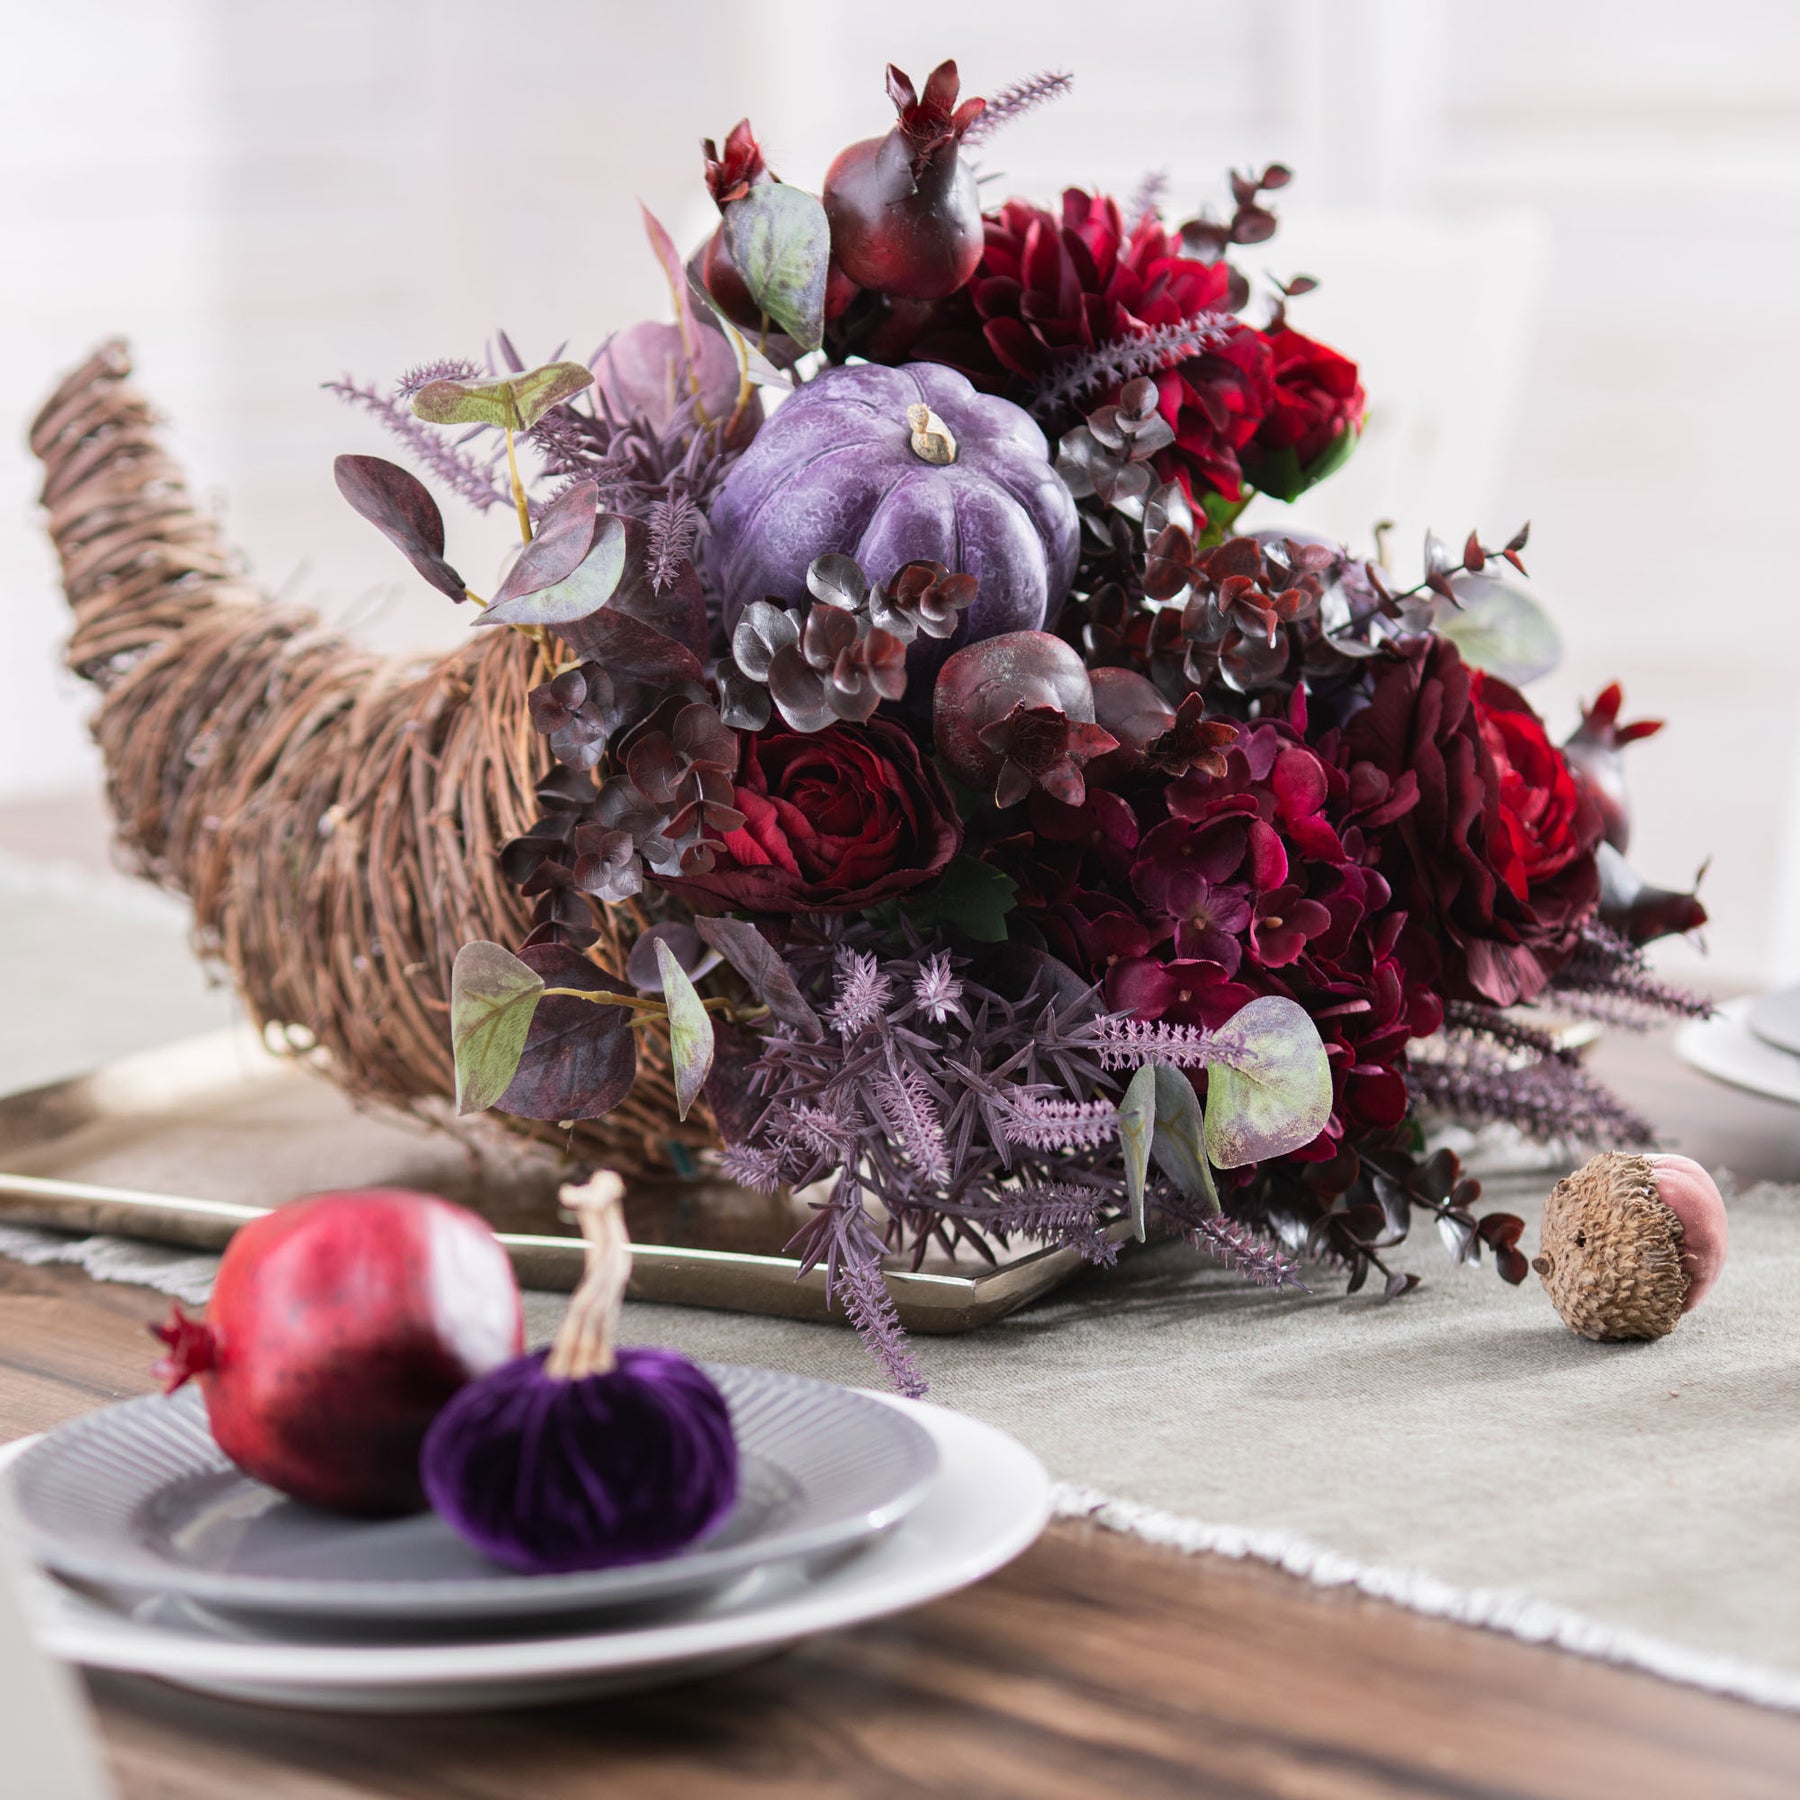 Mini Dried Flower Bouquet Red Purple Rose Dried Lavender Bunches Fall Floral Arrangements for Autumn Thanksgiving Wedding Home Table Vase Farmhouse